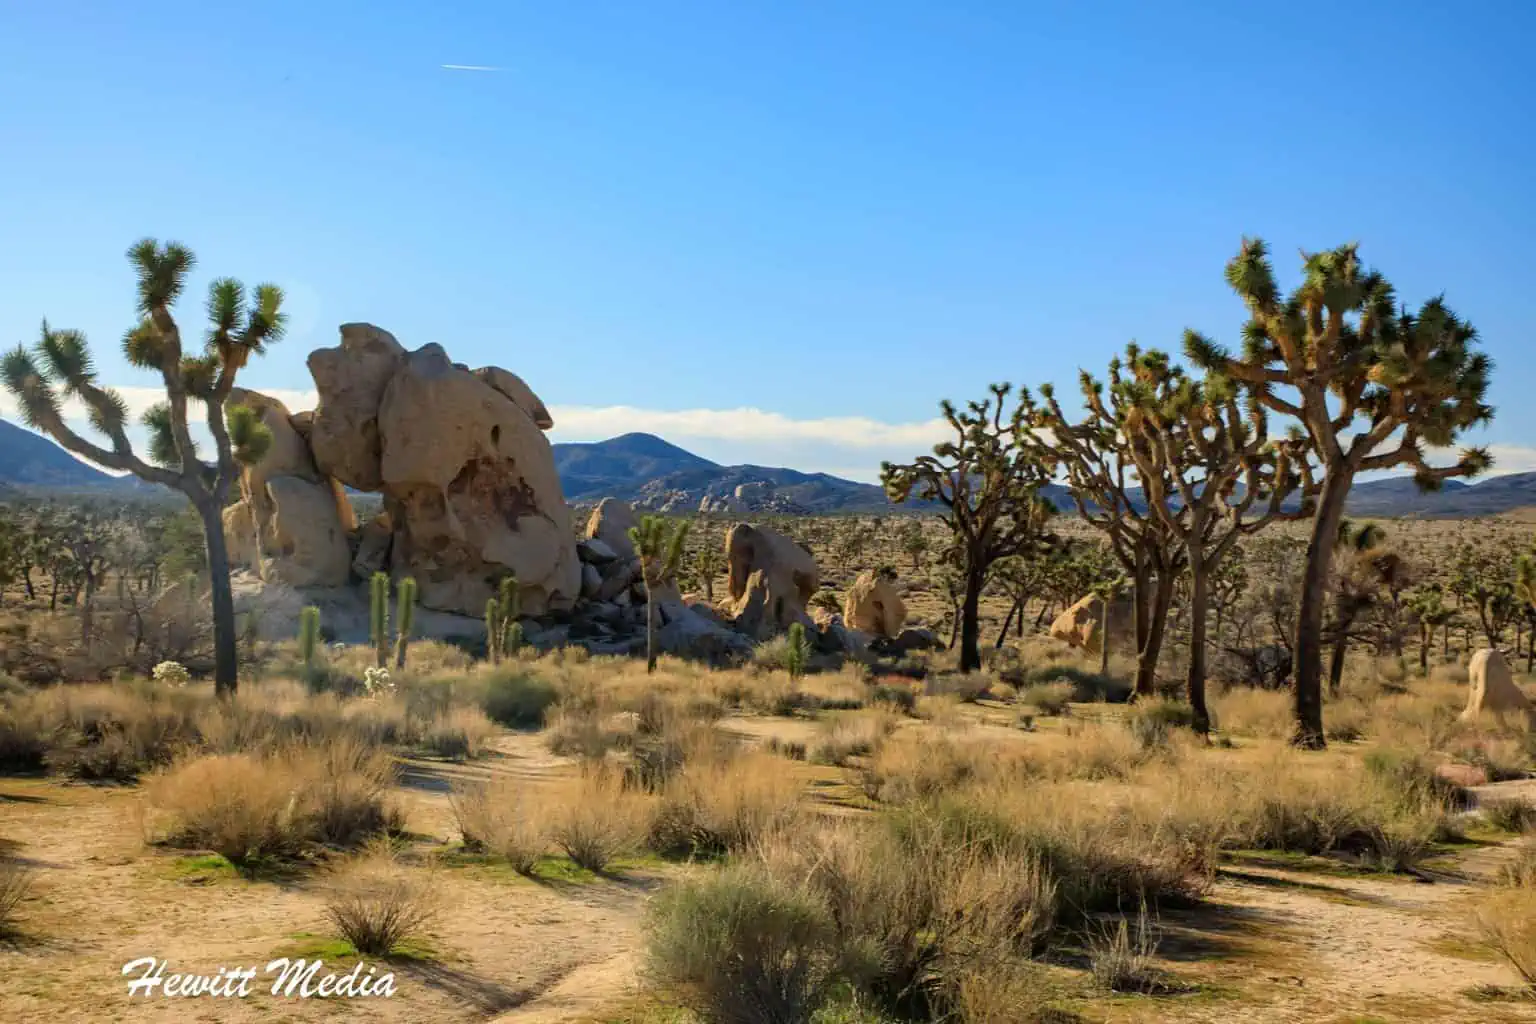 An All You Need Joshua Tree National Park Guide